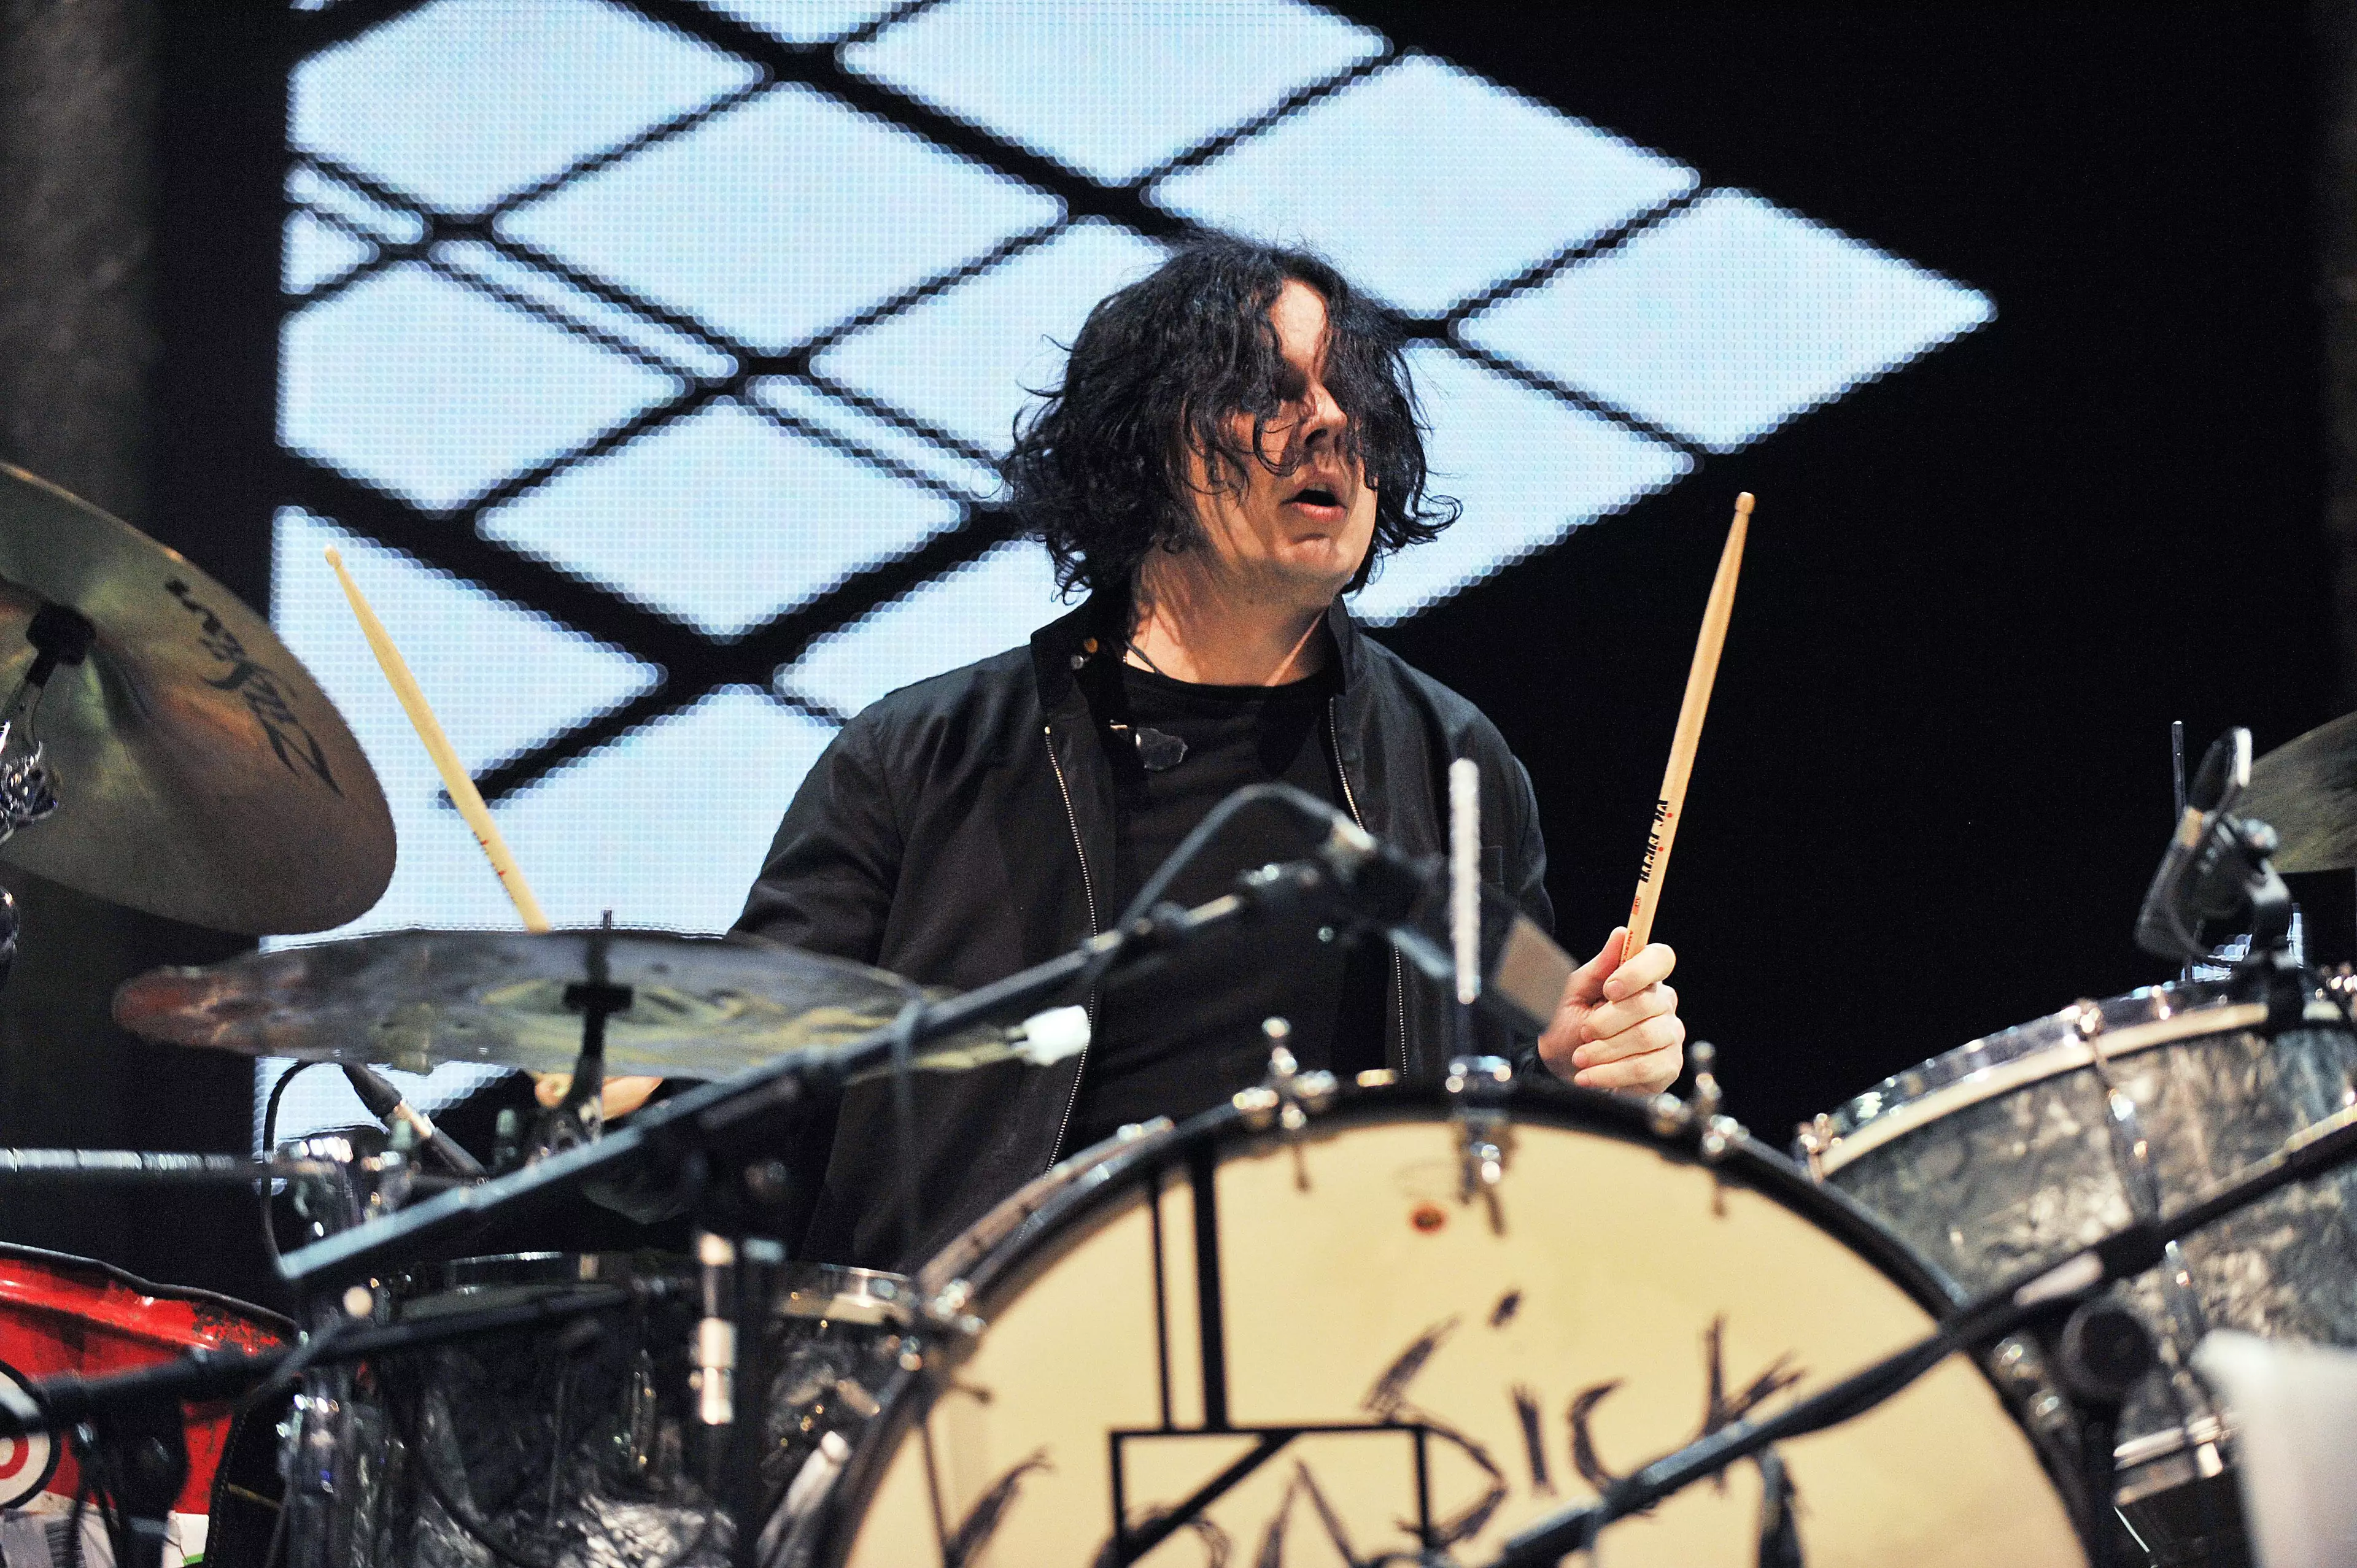 The former White Stripes musician has banned phones from all of his shows.